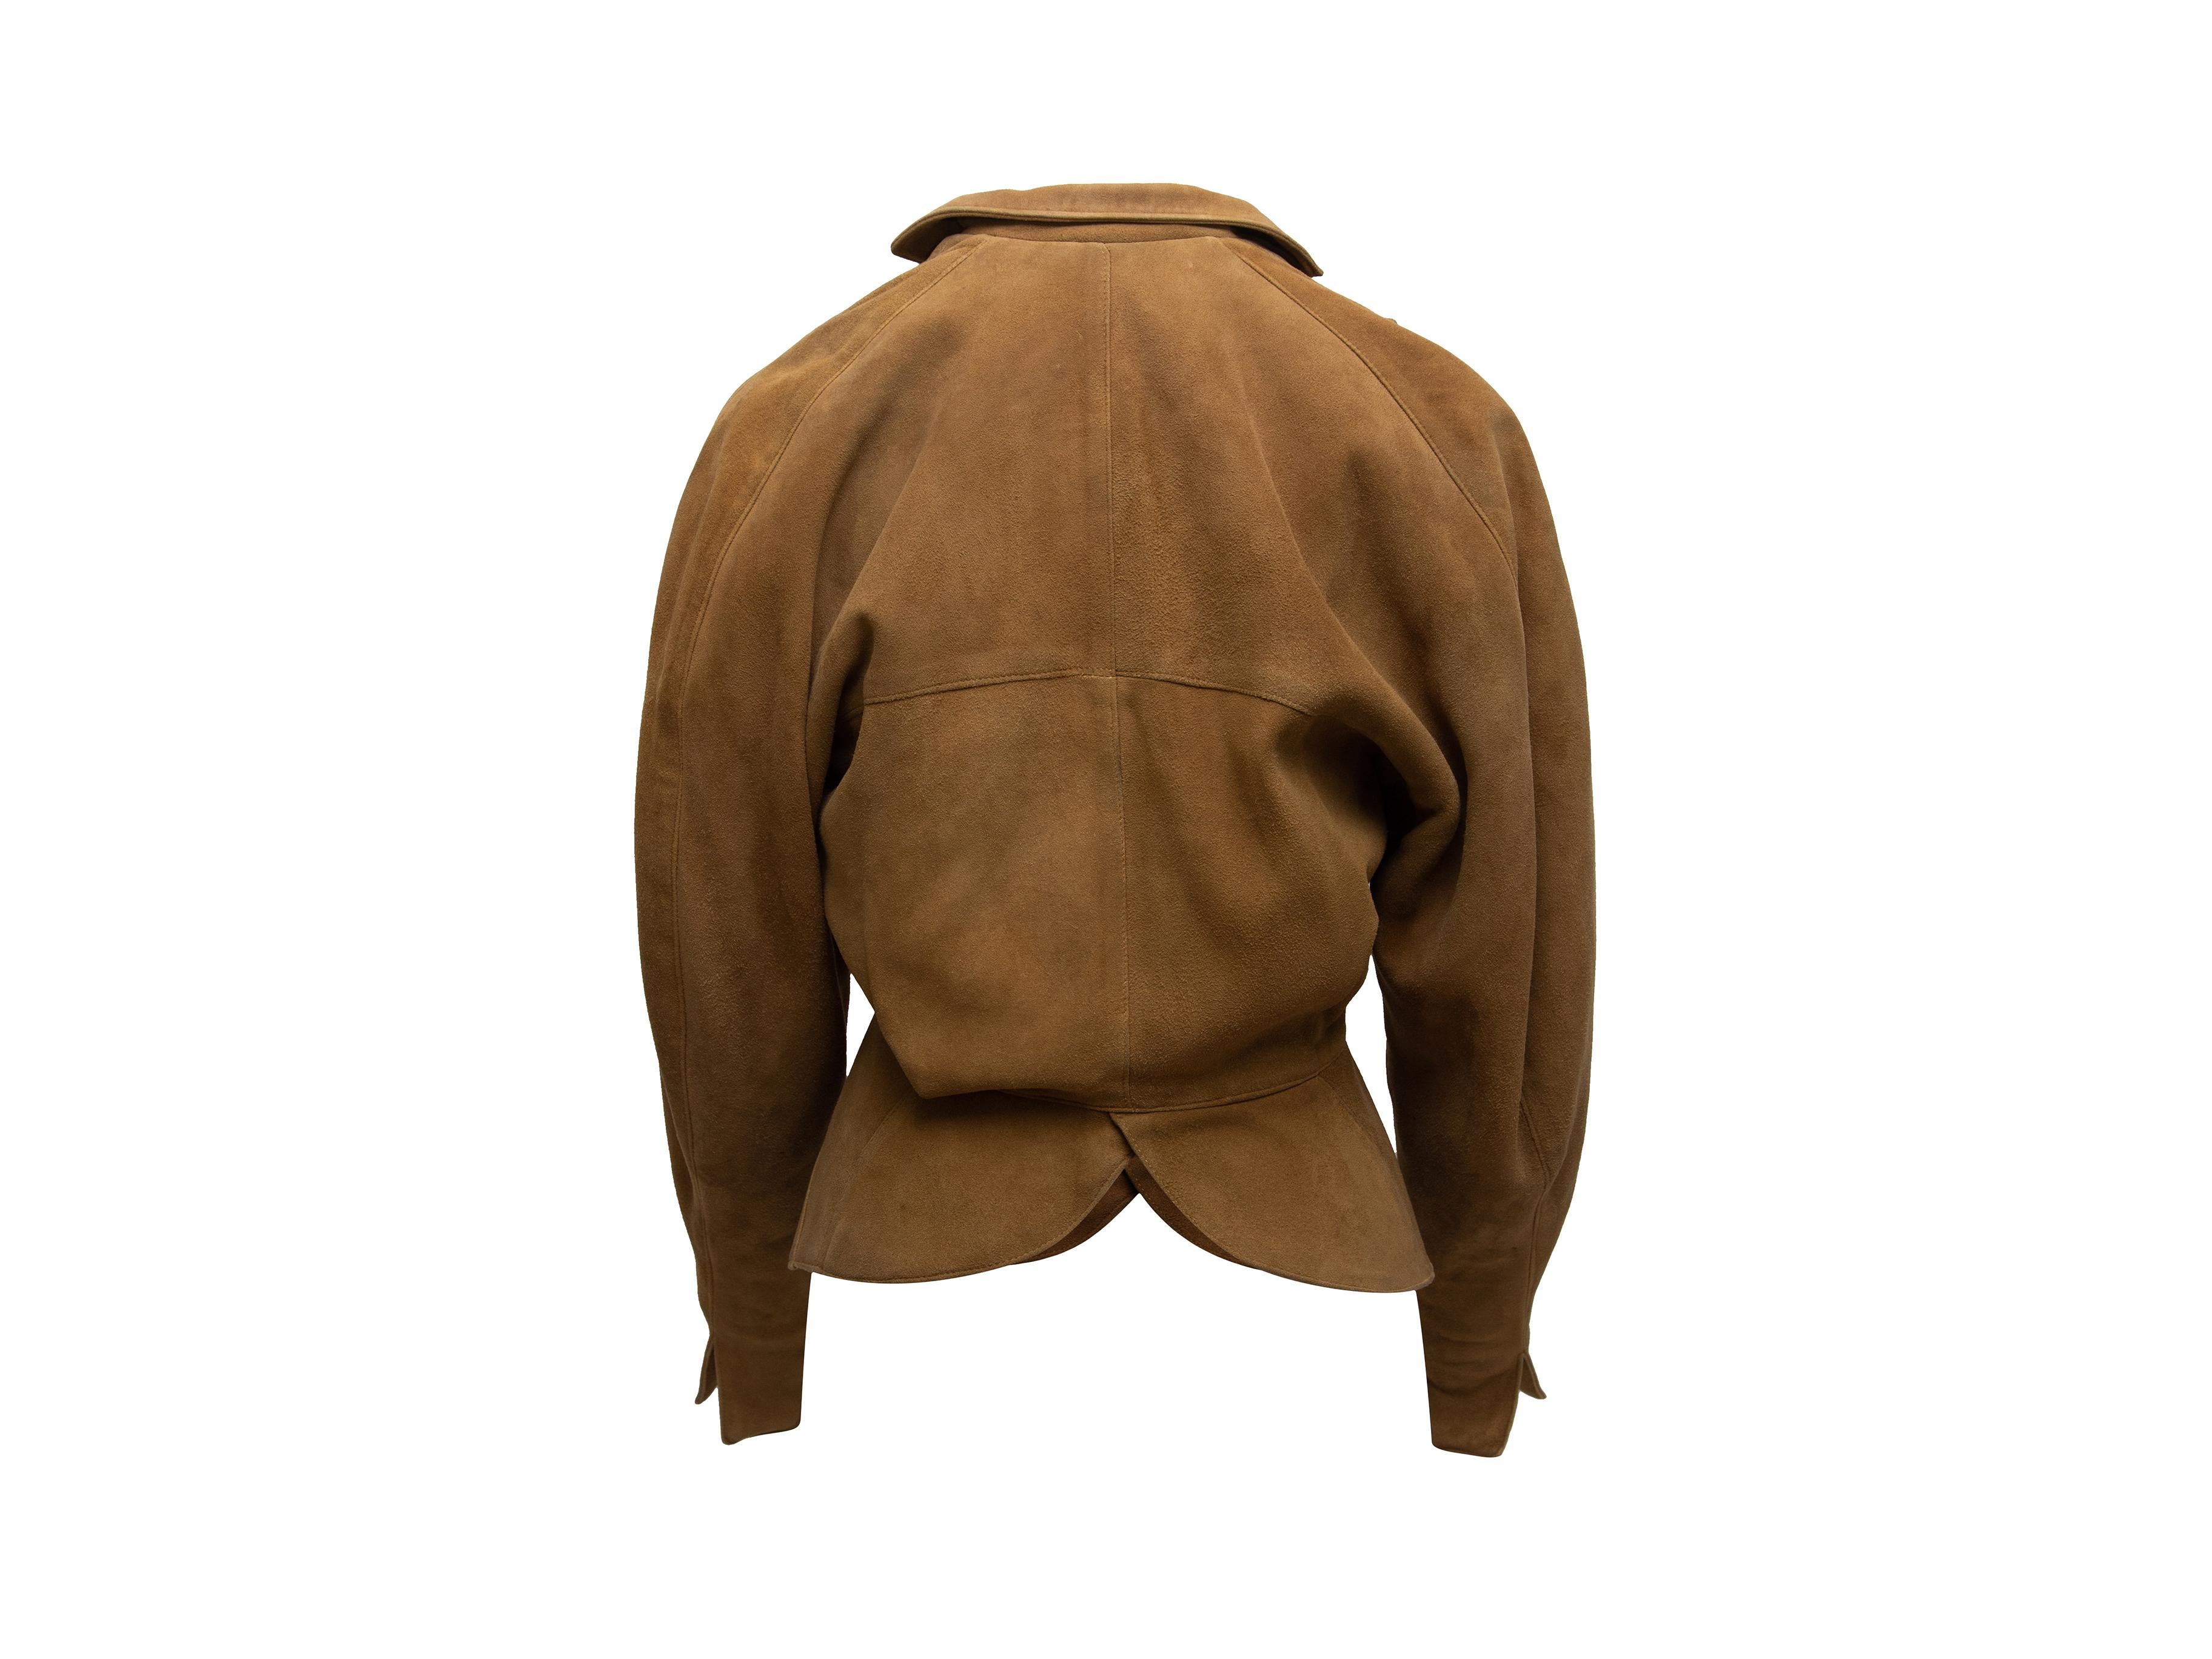 Product details: Vintage tan suede double-breasted jacket by Alaia. Oversize collar. Peplum hem. Button closures at front. Designer size 38. 40